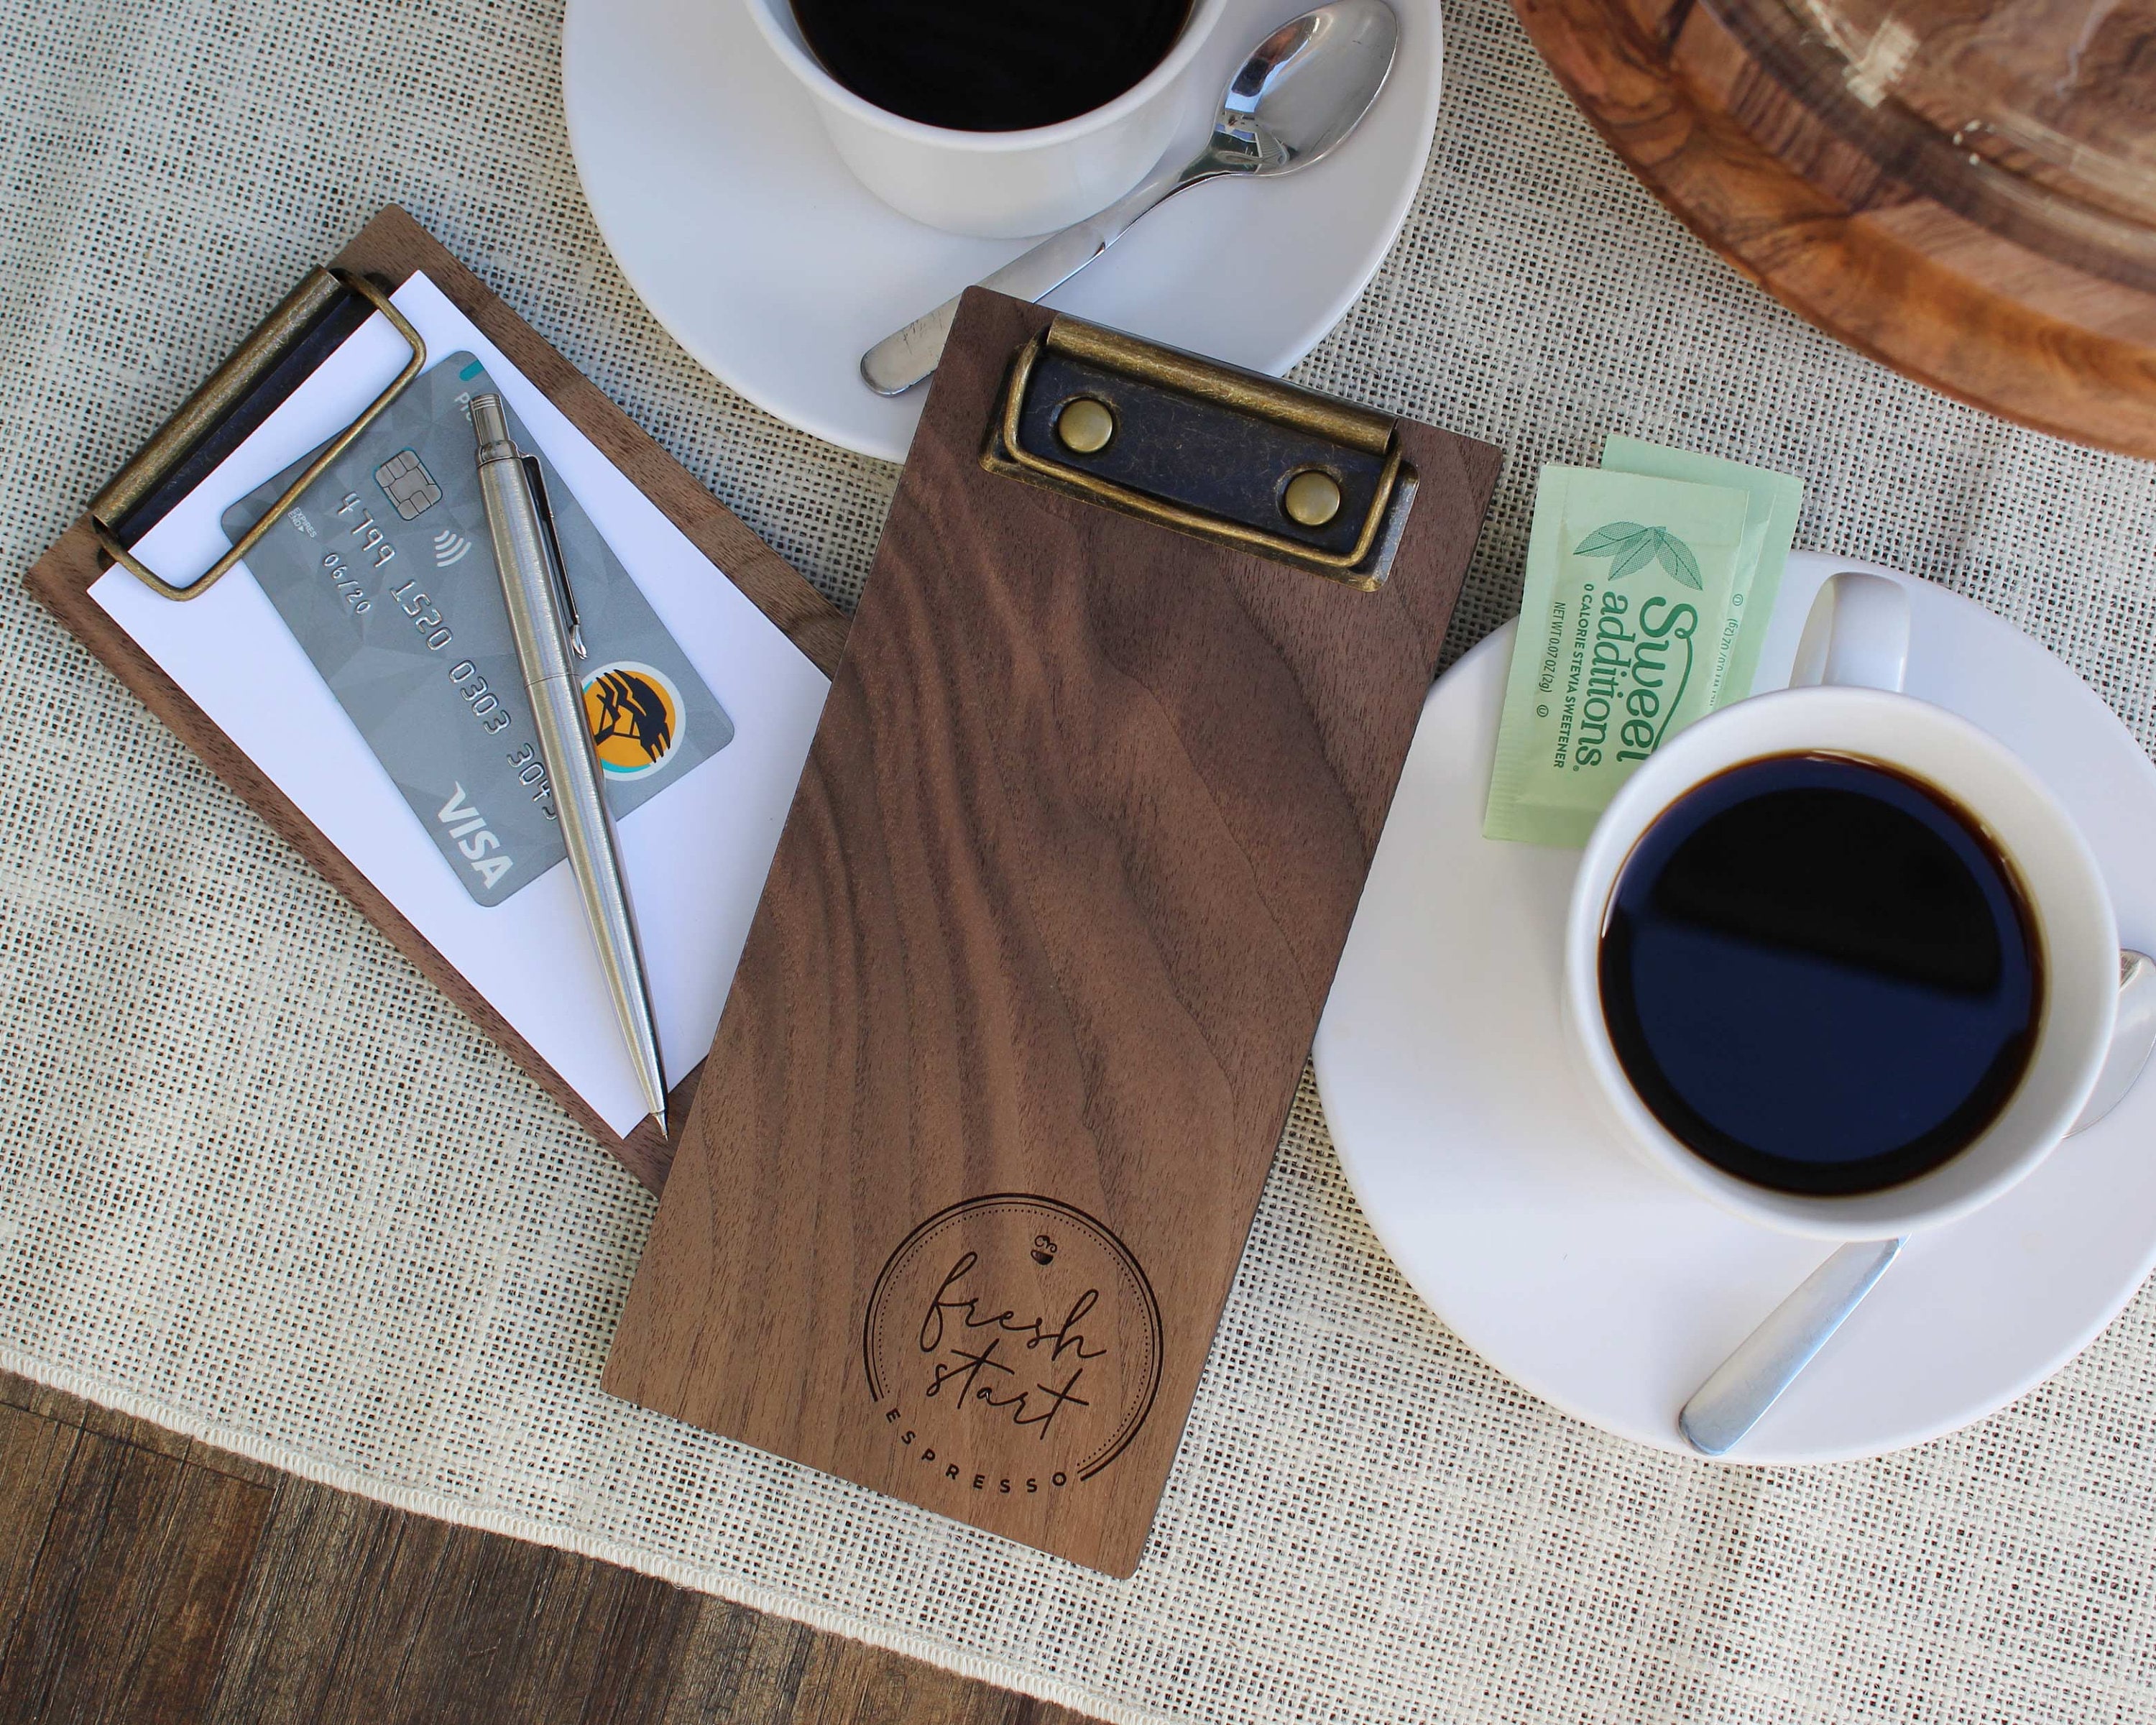 Hand-crafted Wooden Clipboard From Ohio Walnut, Cherry, Oak